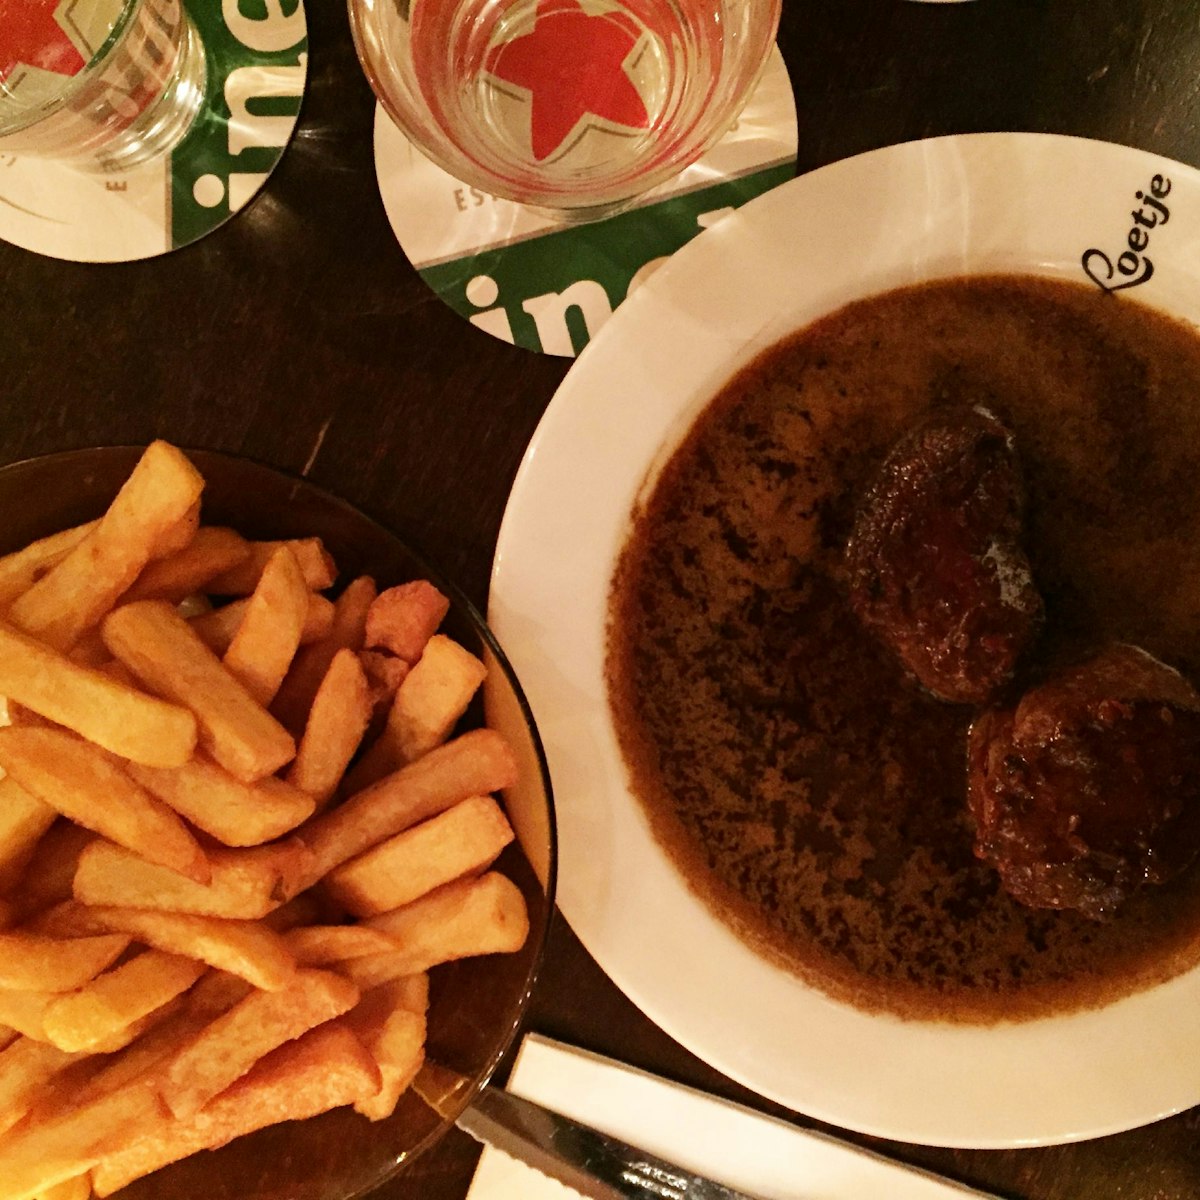 Don't miss the famous beef steaks at Cafe Loetje, Amsterdam